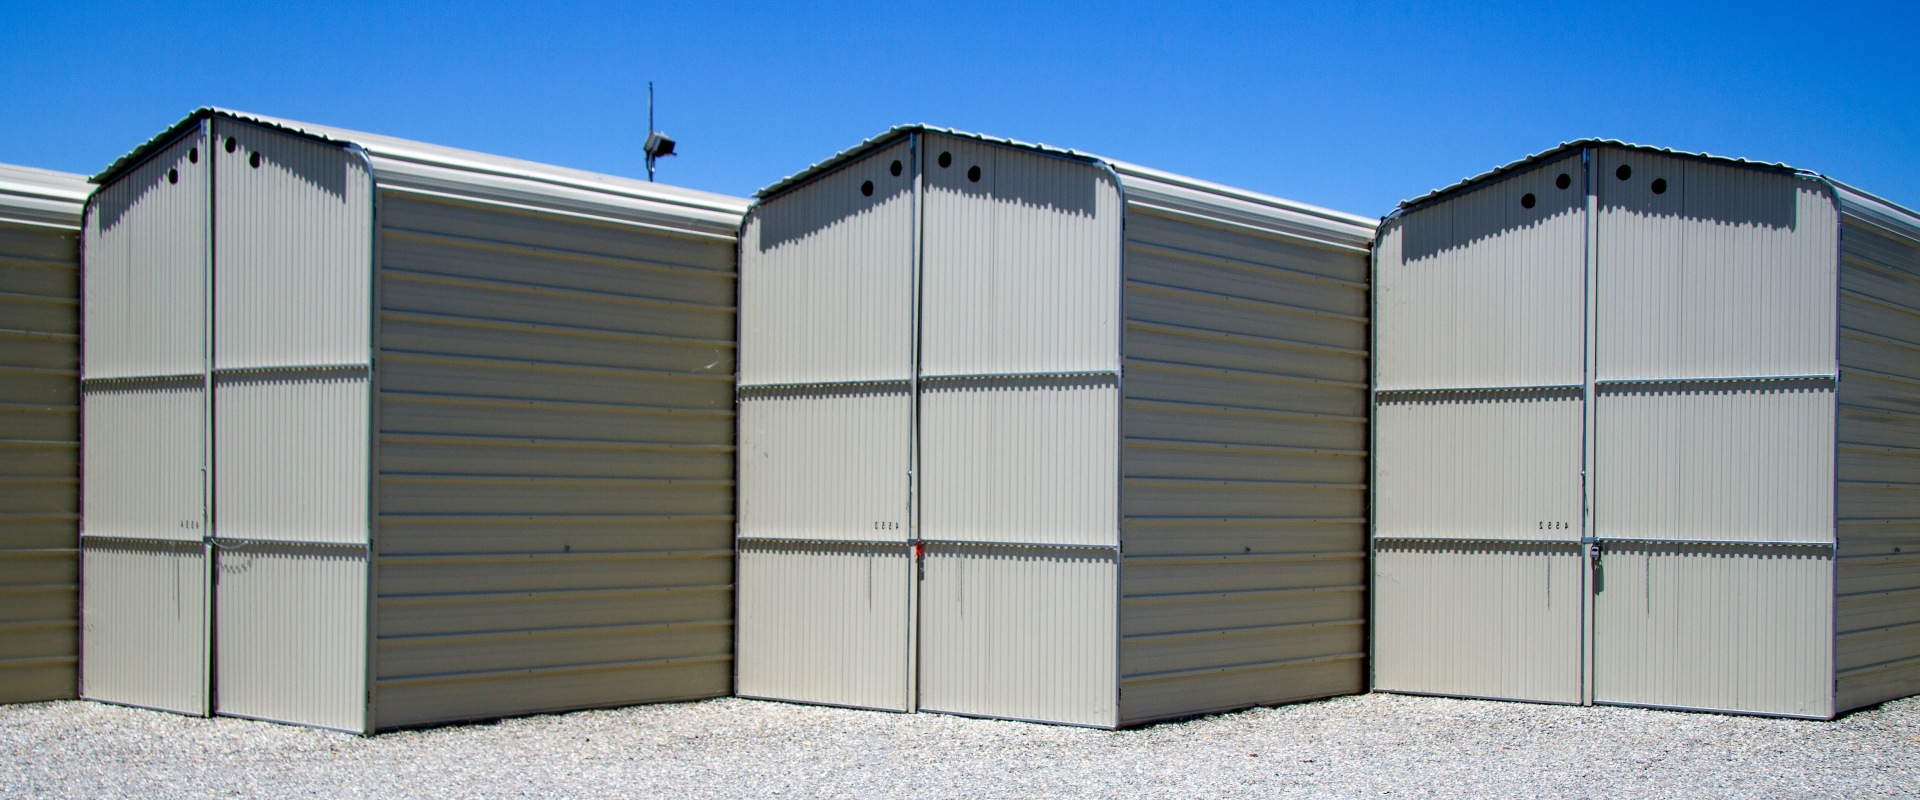 What is the average cost of storage units in bakersfield?